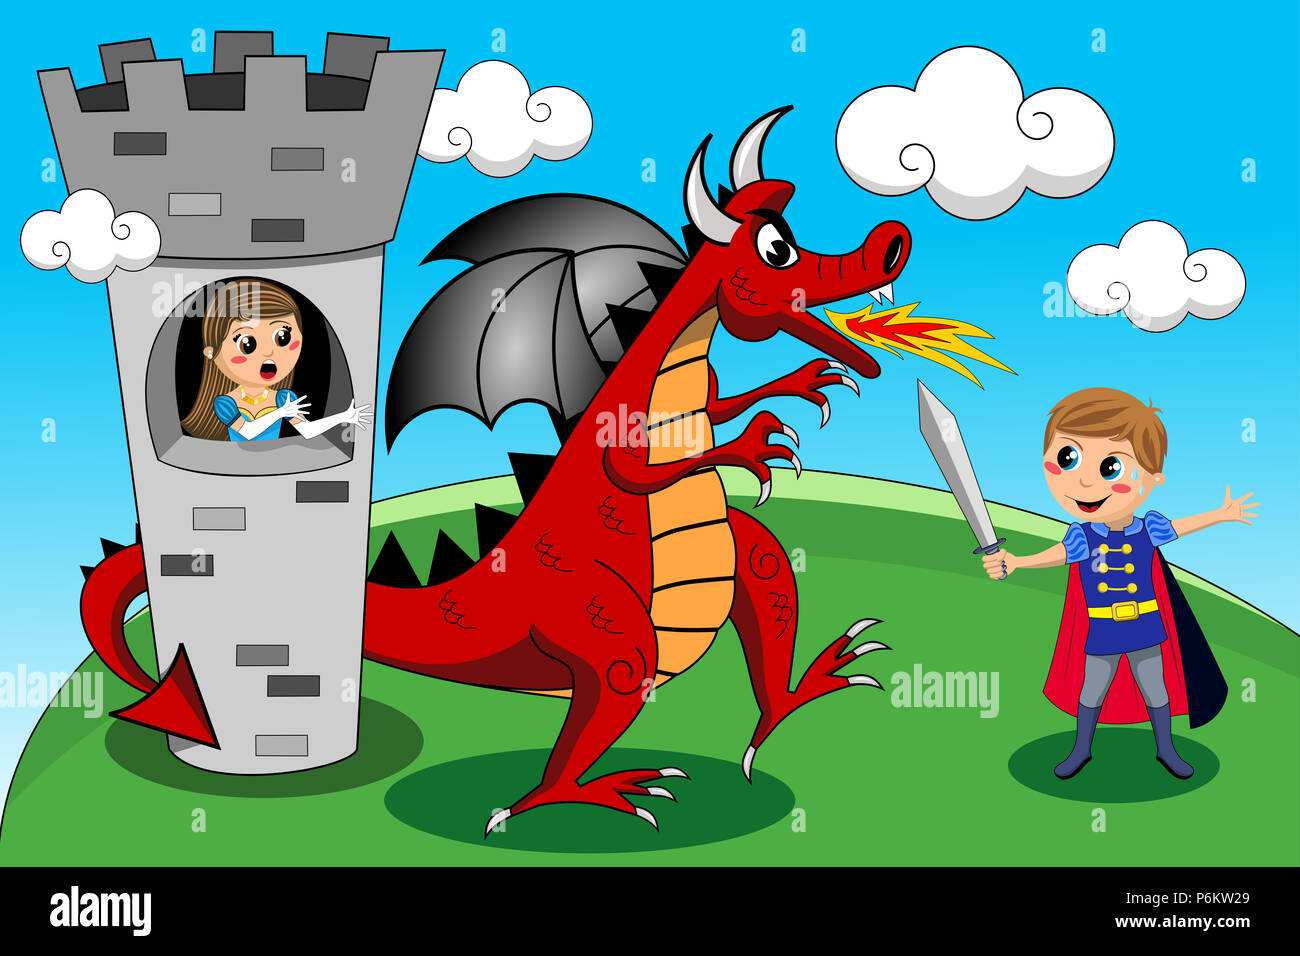 medieval-knight-sword-fighting-against-red-dragon-for-releasing-cute-worried-princess-in-the-tower-P6KW29.jpg